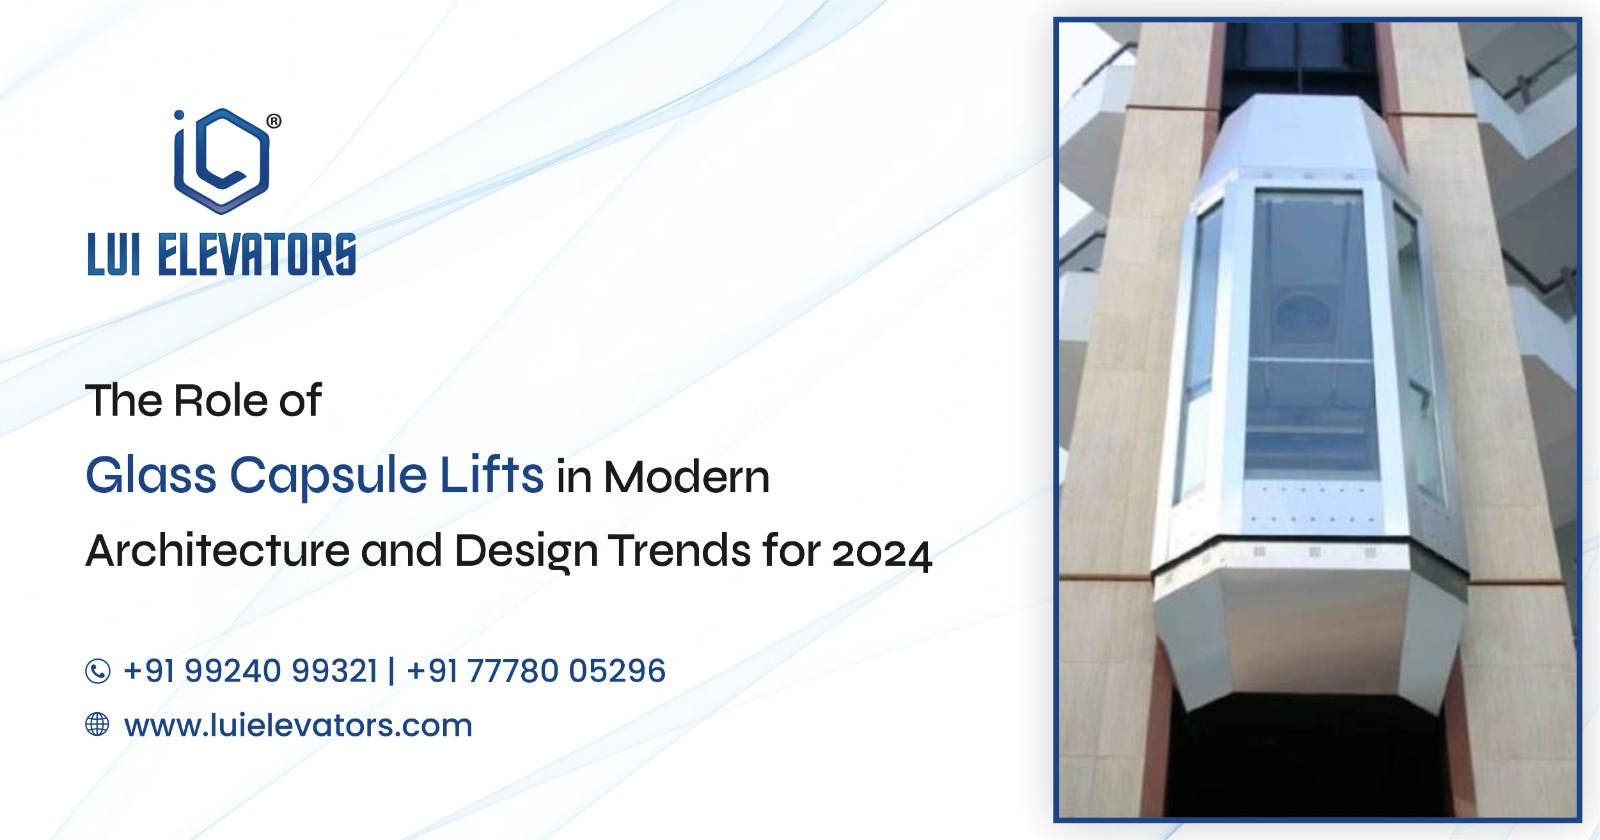 The Role of Glass Capsule Lifts in Modern Architecture and Design Trends for 2024